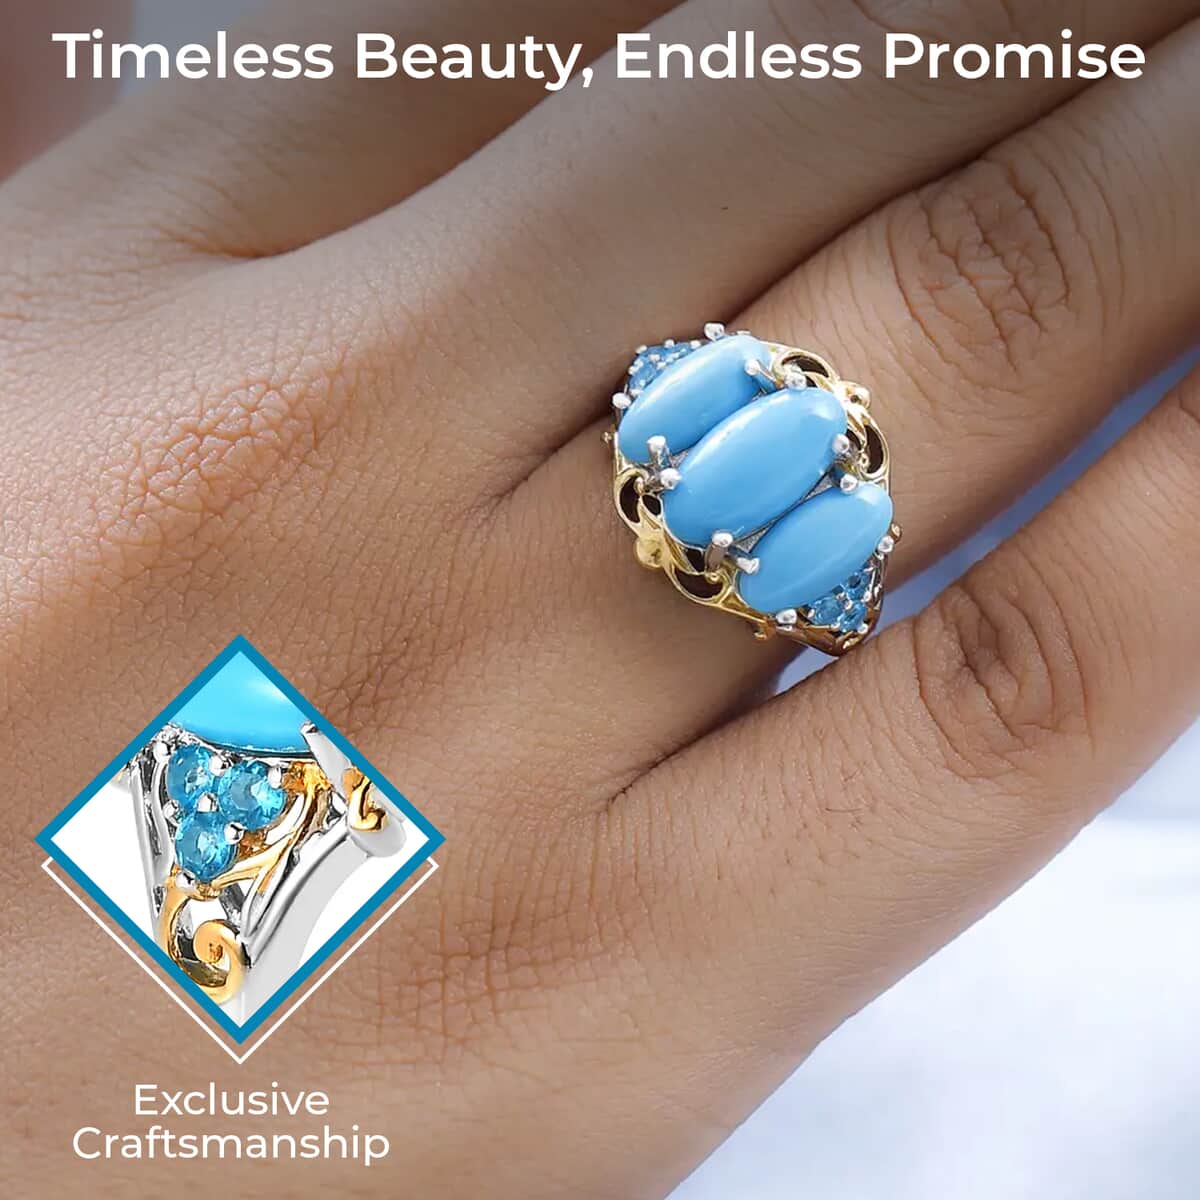 Premium Sleeping Beauty Turquoise Ring with Malgache Neon Apatite in Vermeil YG and Platinum Over Sterling Silver, Statement Rings For Women 4.50 ctw (Size 8.0) image number 2